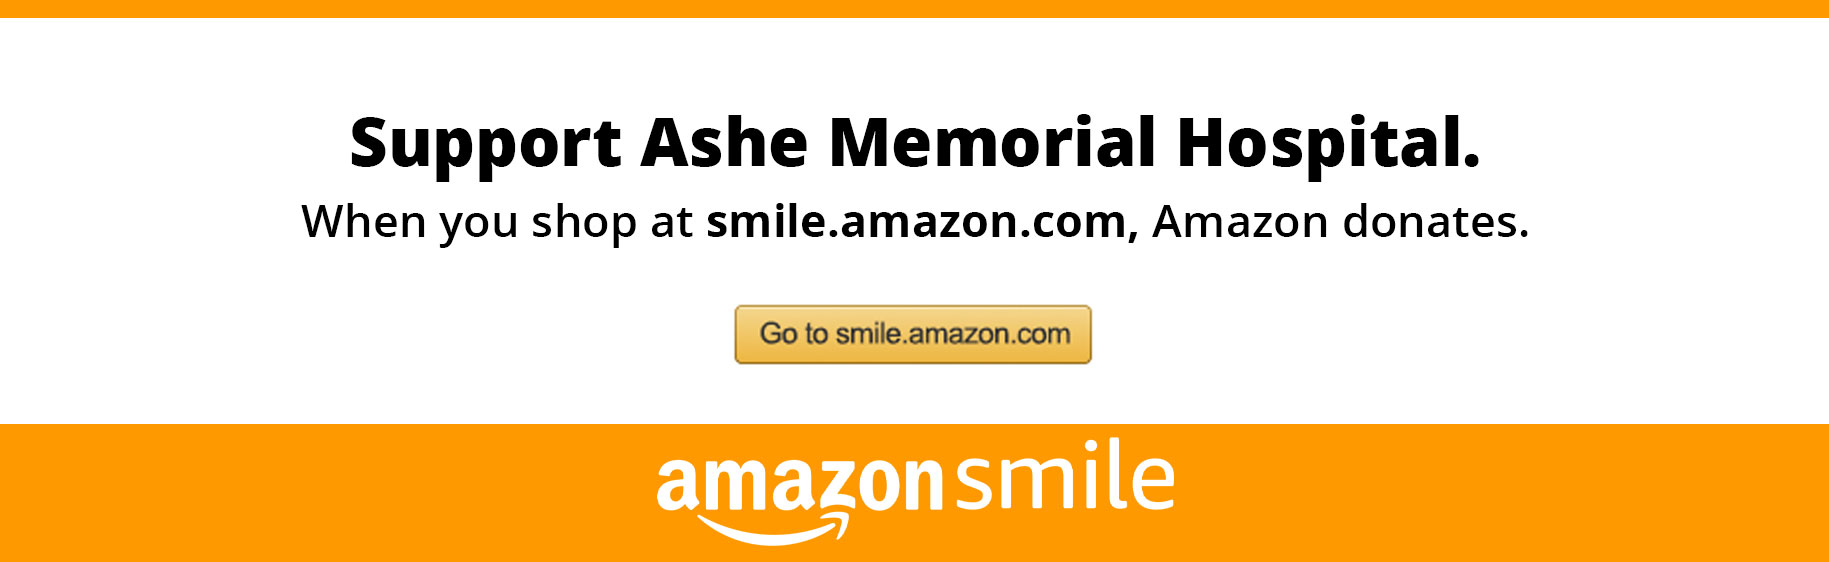 Banner that says:

Support Ashe Memorial Hospital.
When you shop at smile.amazon.com, Amazon donates.
((( Go ro amile.amazon.com
amazon smile